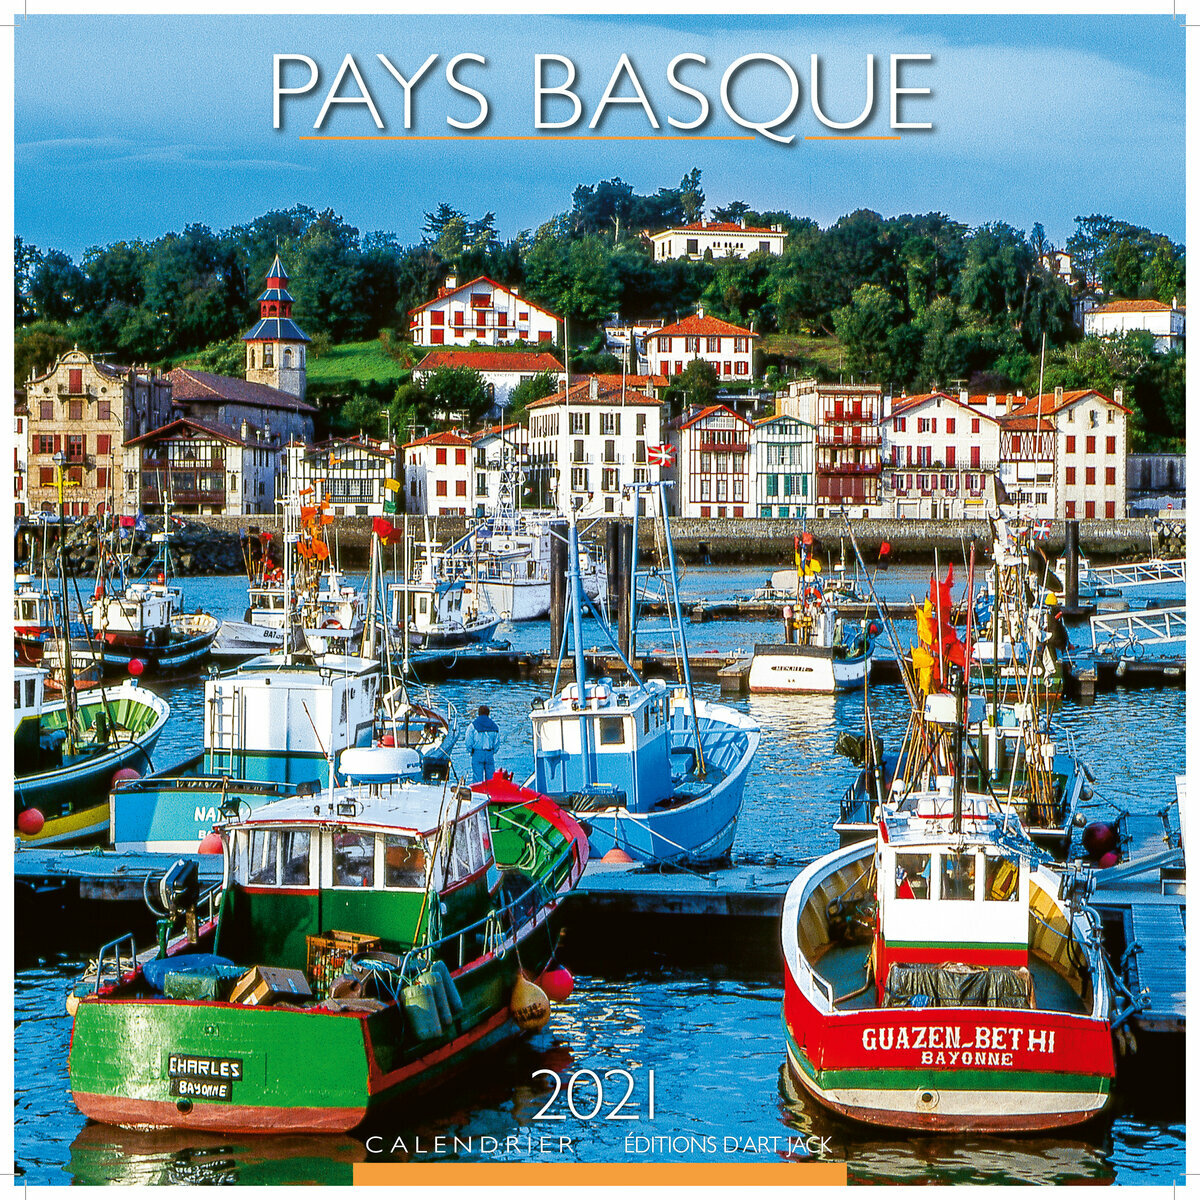 Calendrier Des Payes 2021 calendrier Pays basque 2021